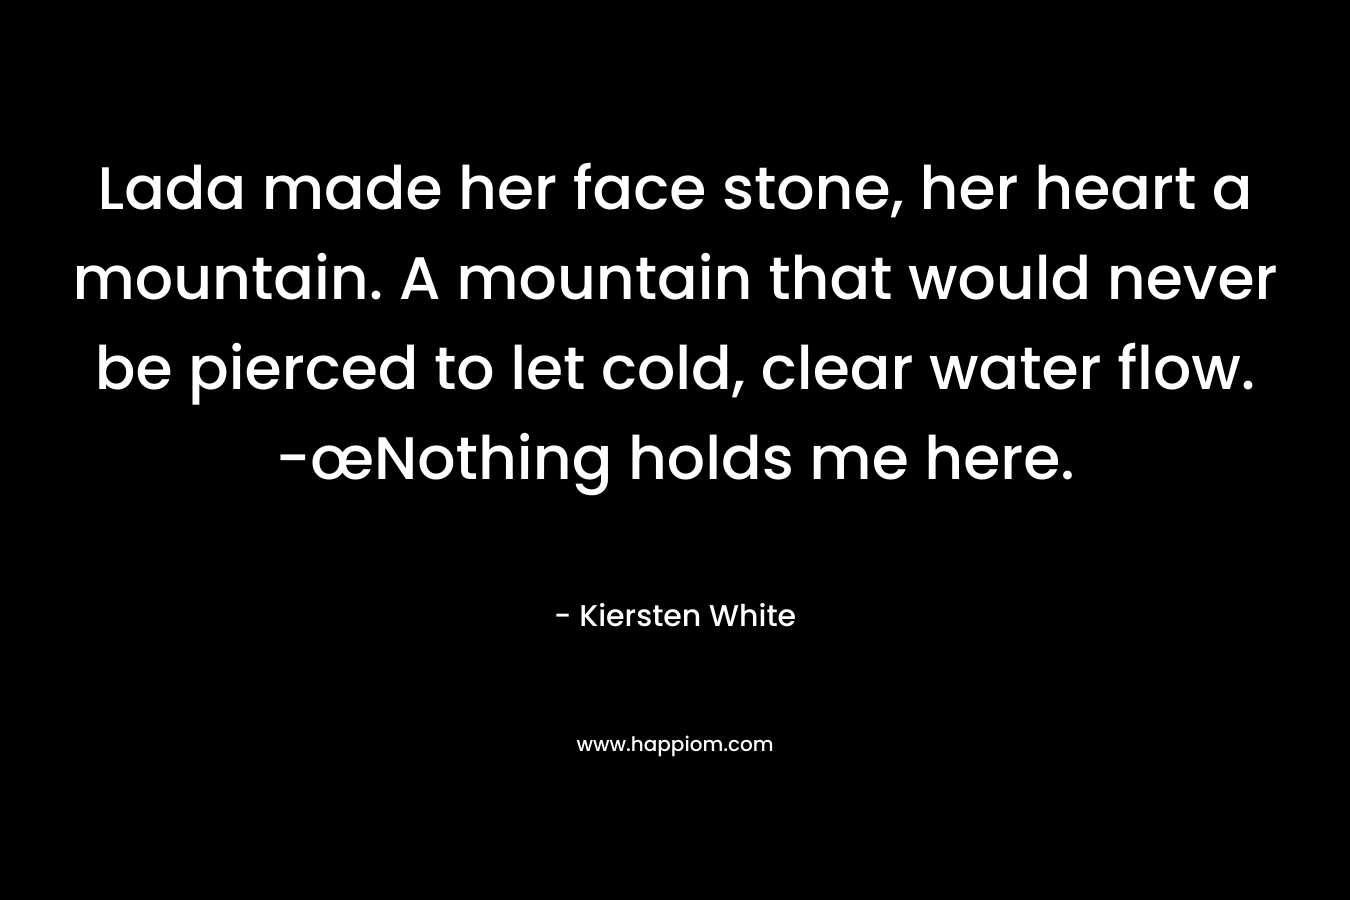 Lada made her face stone, her heart a mountain. A mountain that would never be pierced to let cold, clear water flow. -œNothing holds me here.